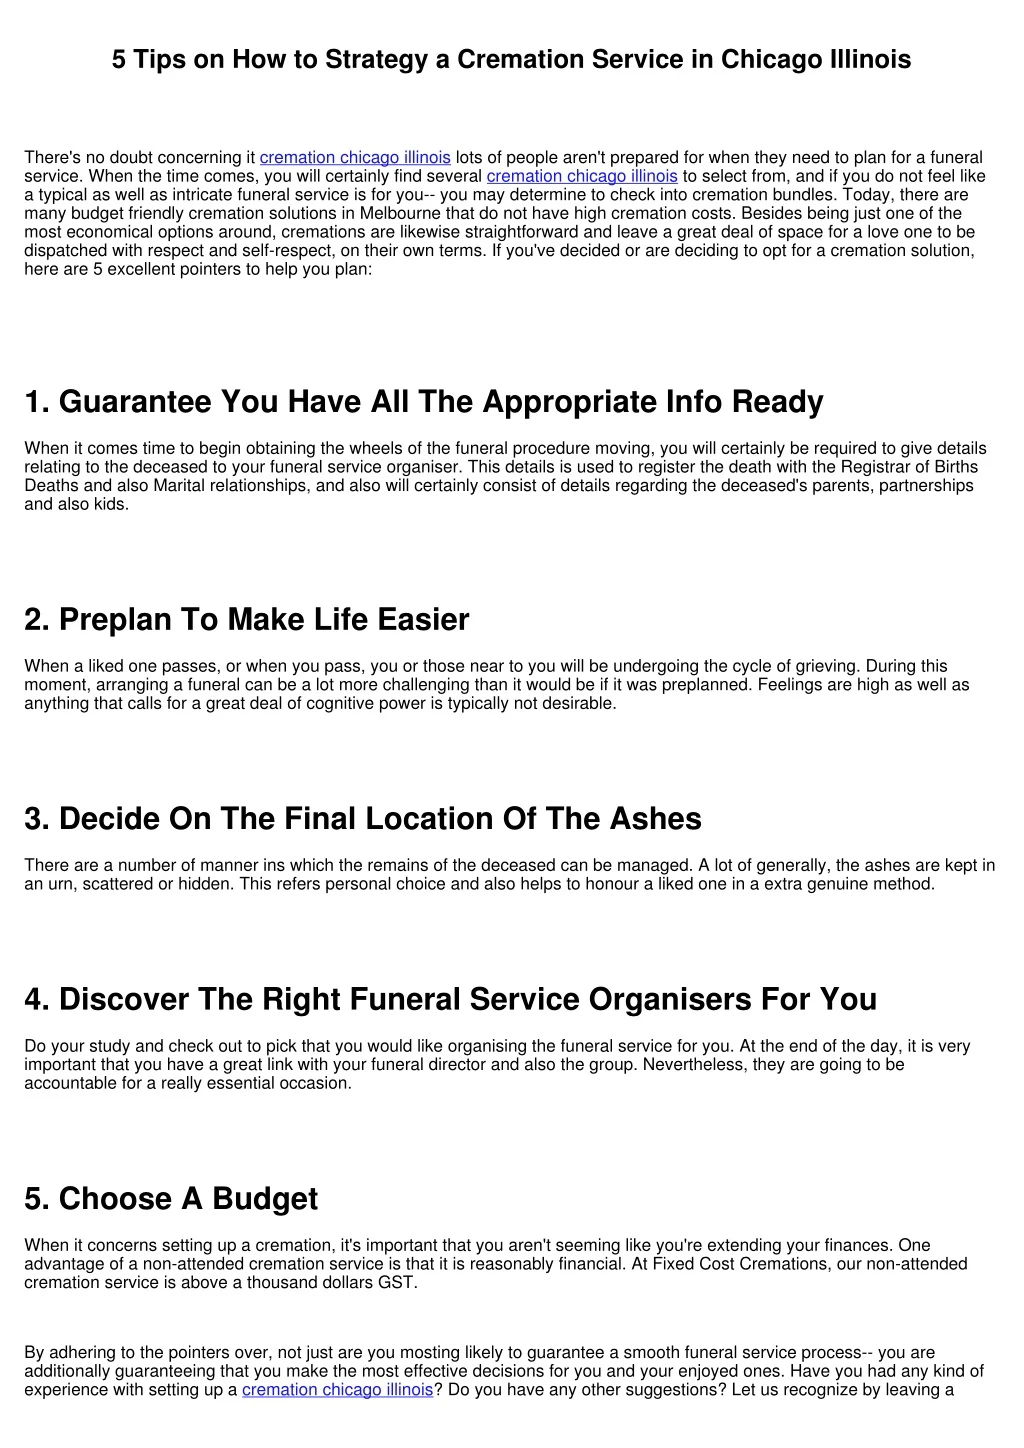 5 tips on how to strategy a cremation service